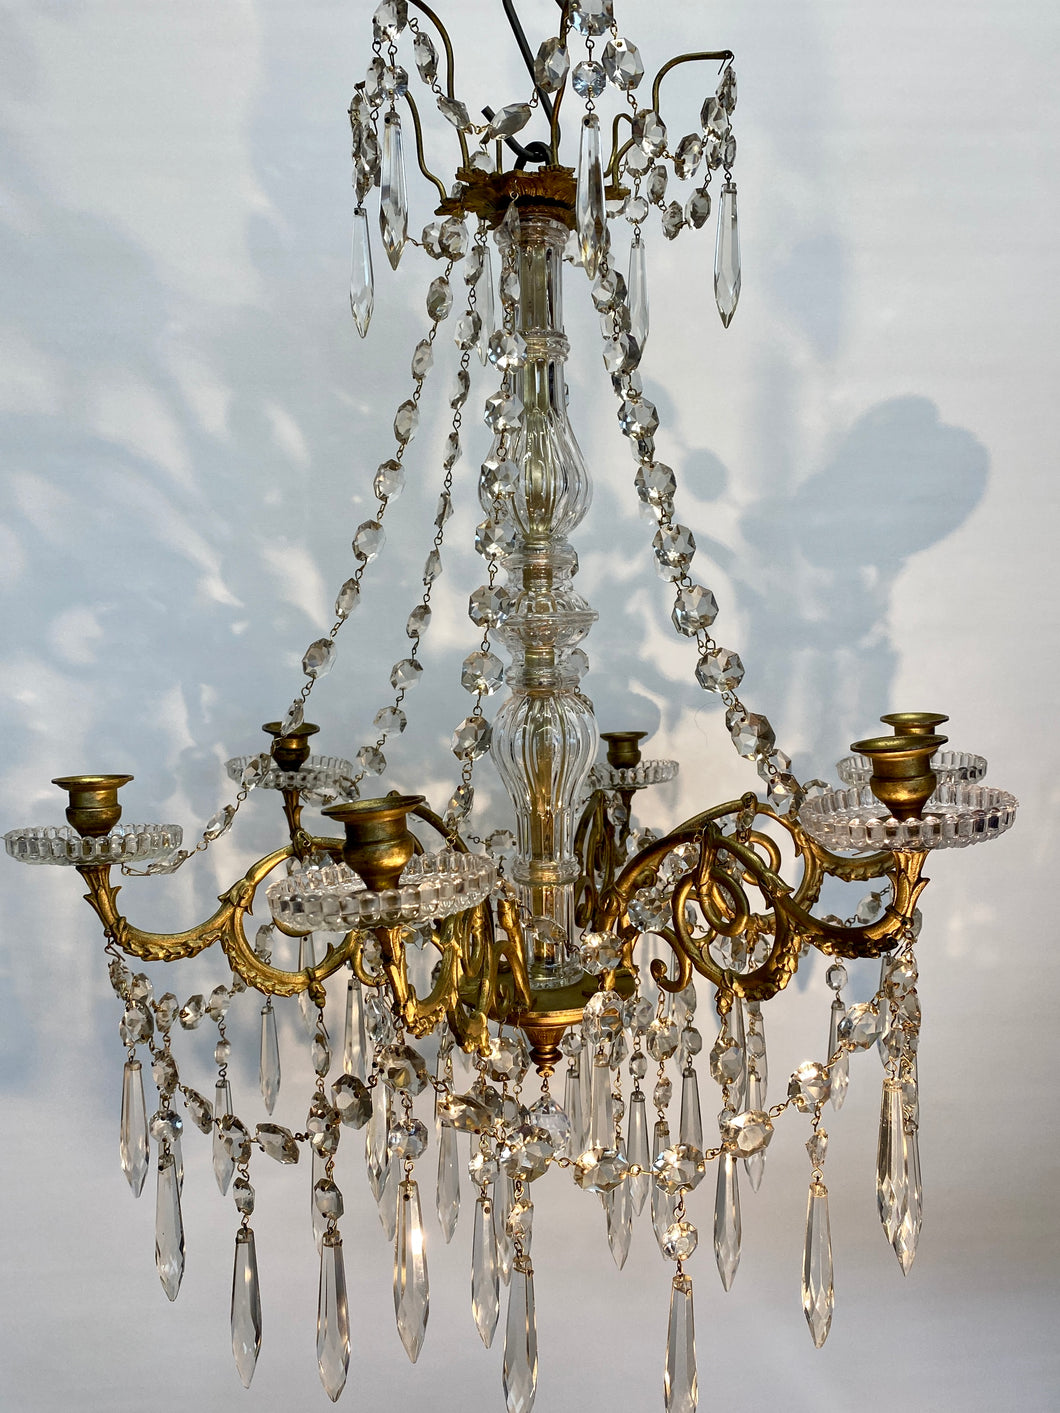 Antique / vintage Candelabra with 6 ornate Brass arms with an abundance of crystal swags & prism drops.